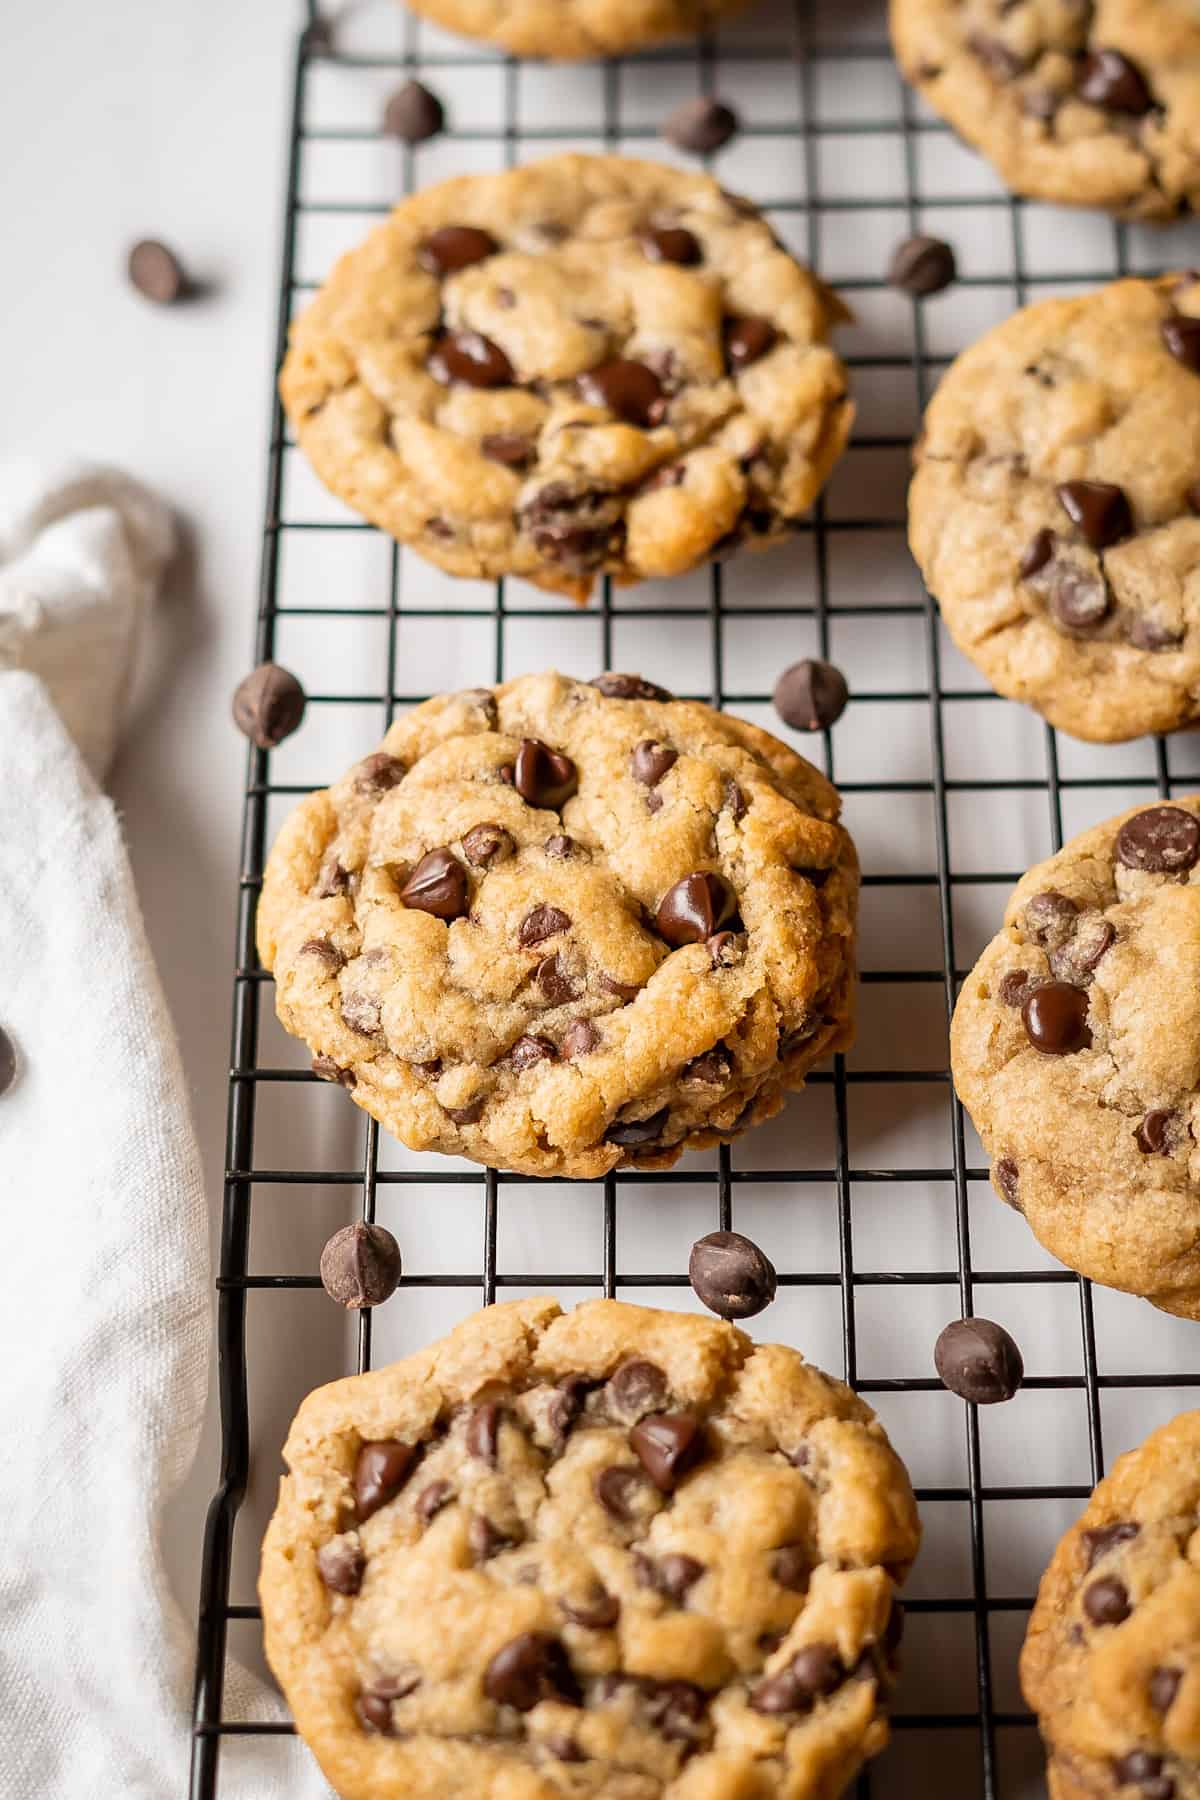 A cooling rack full of freshly baked vegan and gluten-free chocolate chip cookies.